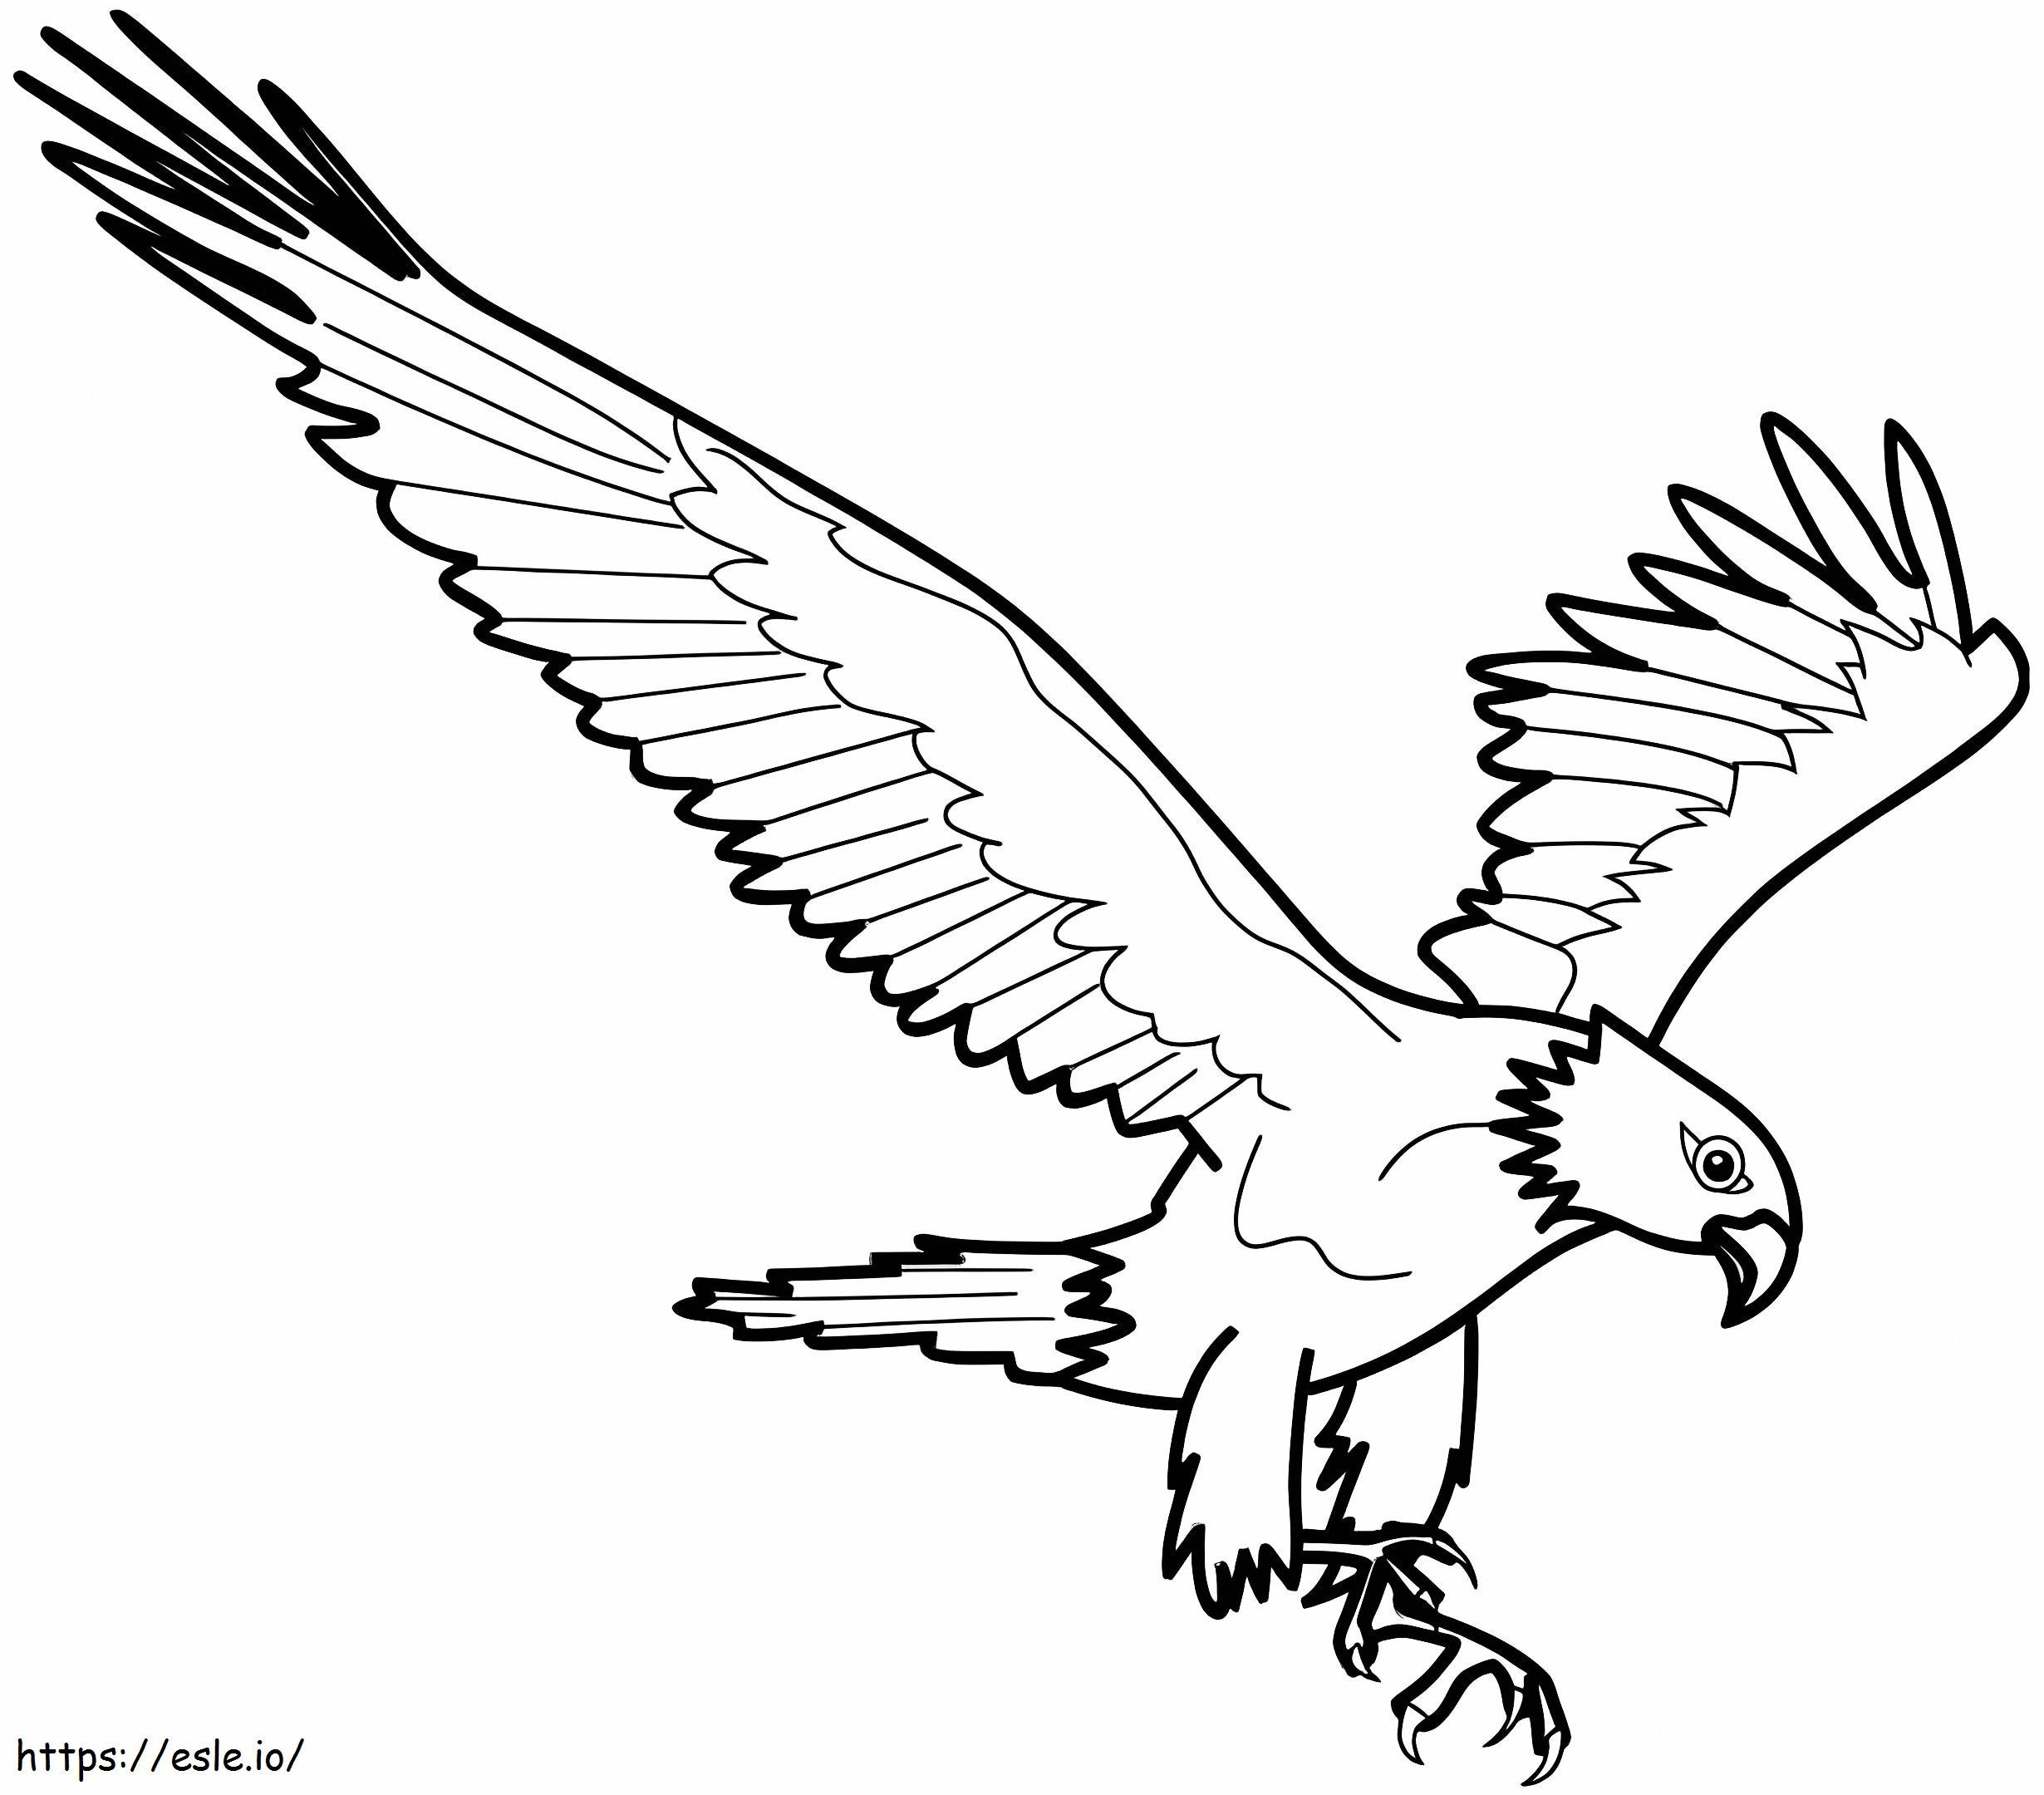 Normal Eagle coloring page